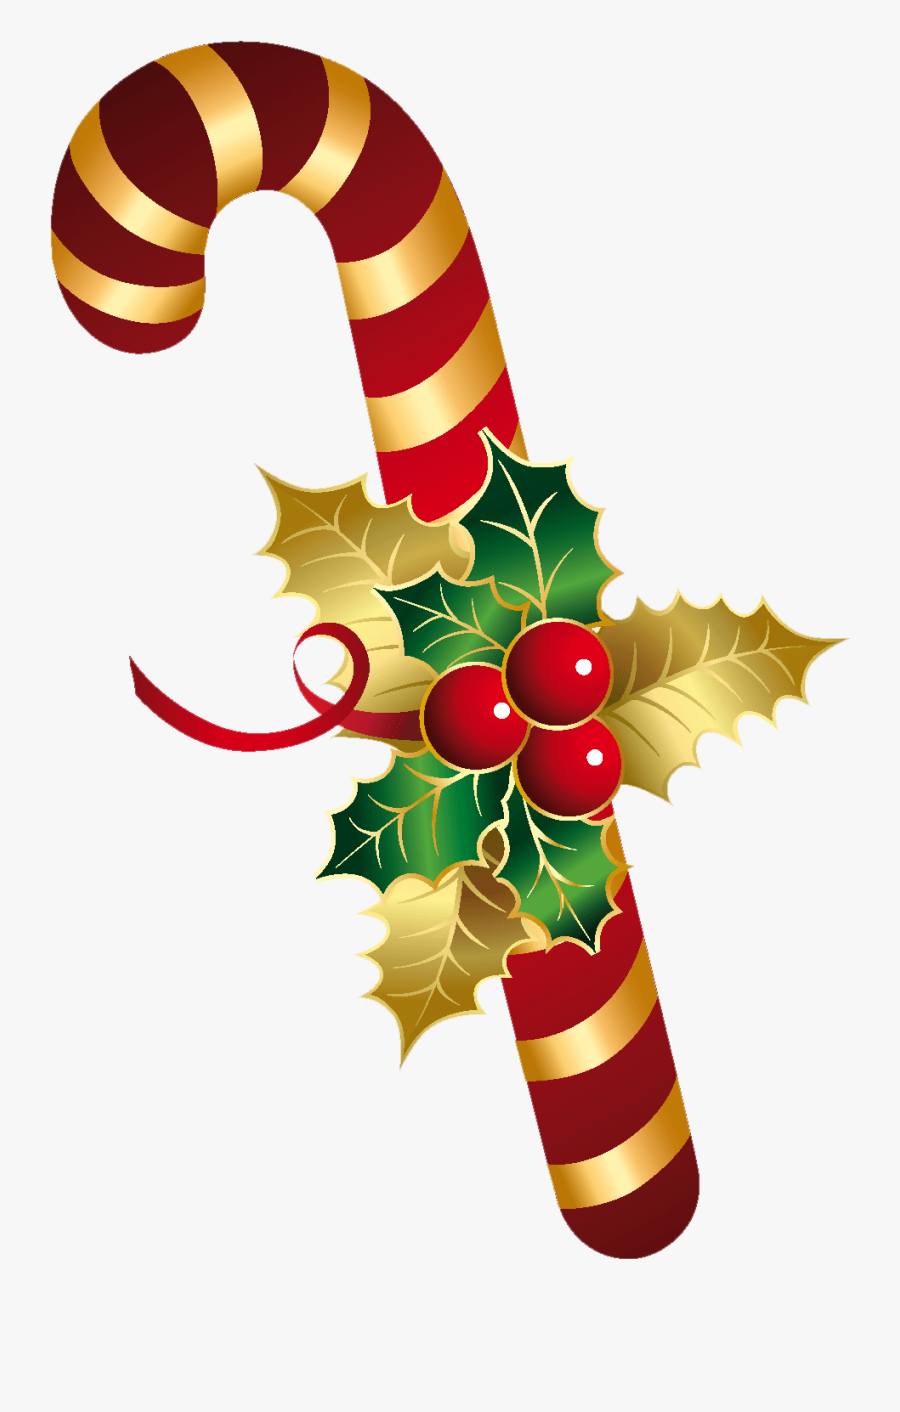 Transparent Candy Caneclipart - Christmas Candy Cane Clipart, Transparent Clipart